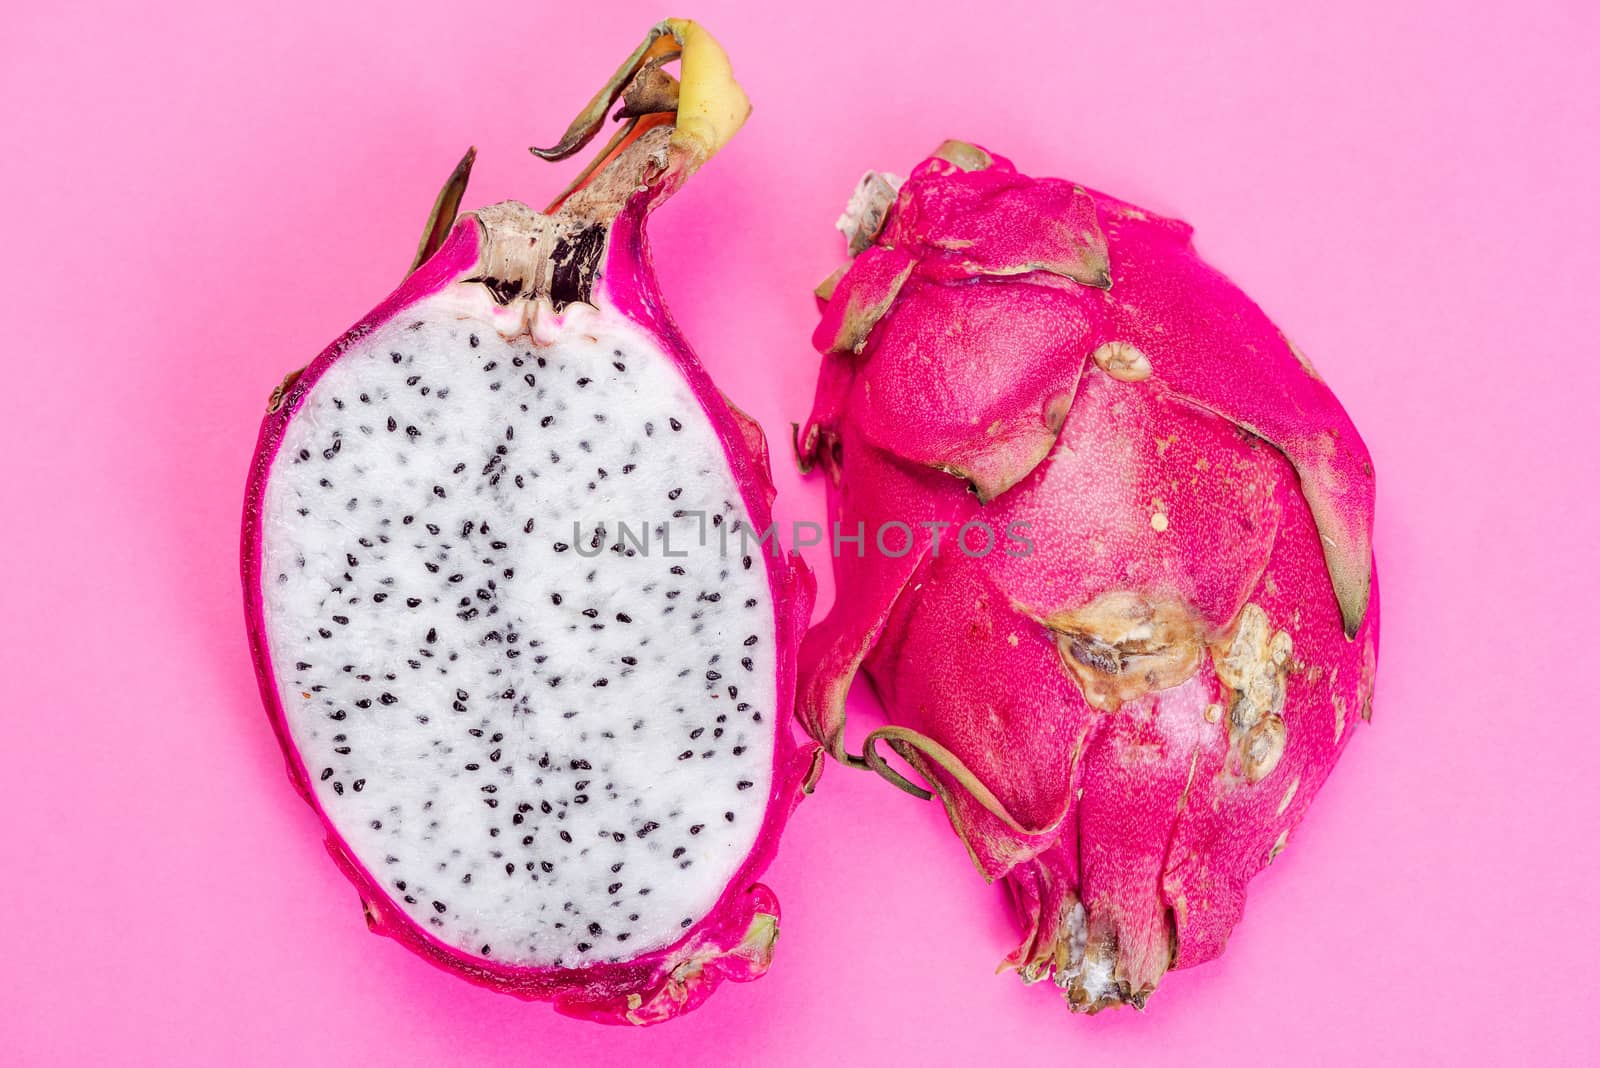 Pitahaya or Dragon Fruit Cut in Half on Pink Pastel Background.  by merc67